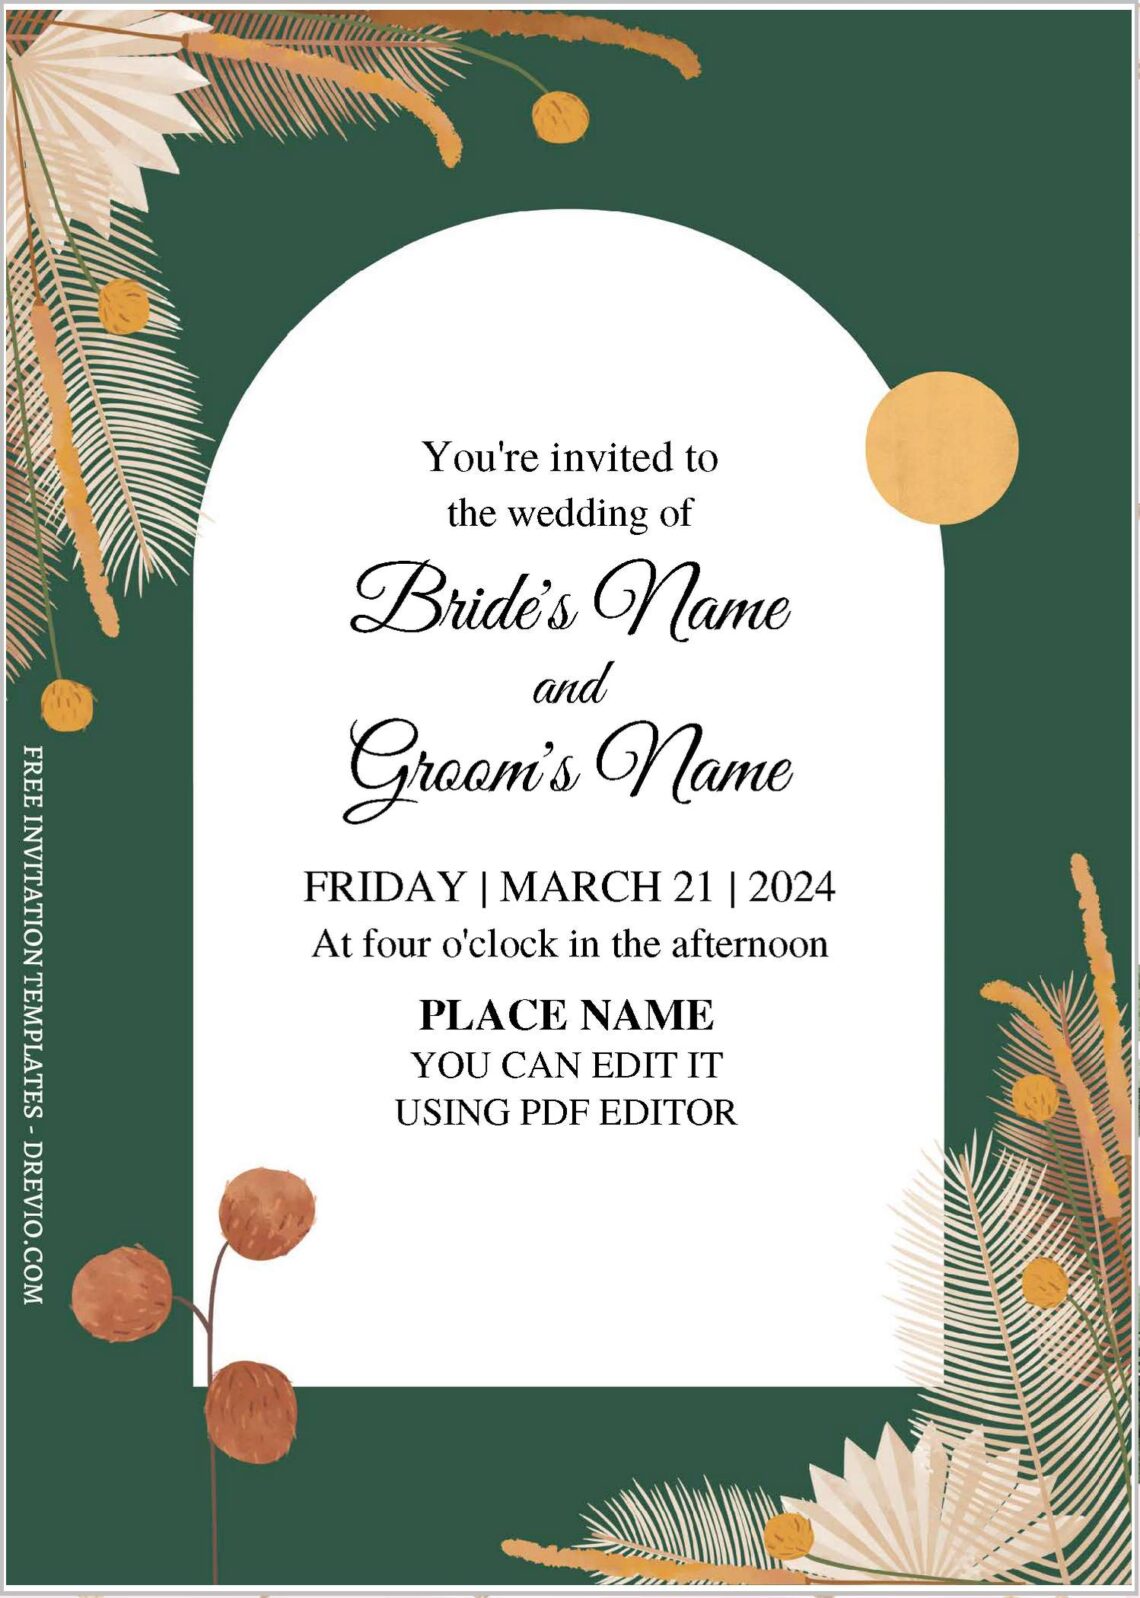 (Free Editable PDF) Soothing Garden Inspired Wedding Invitation Templates with elegant fonts